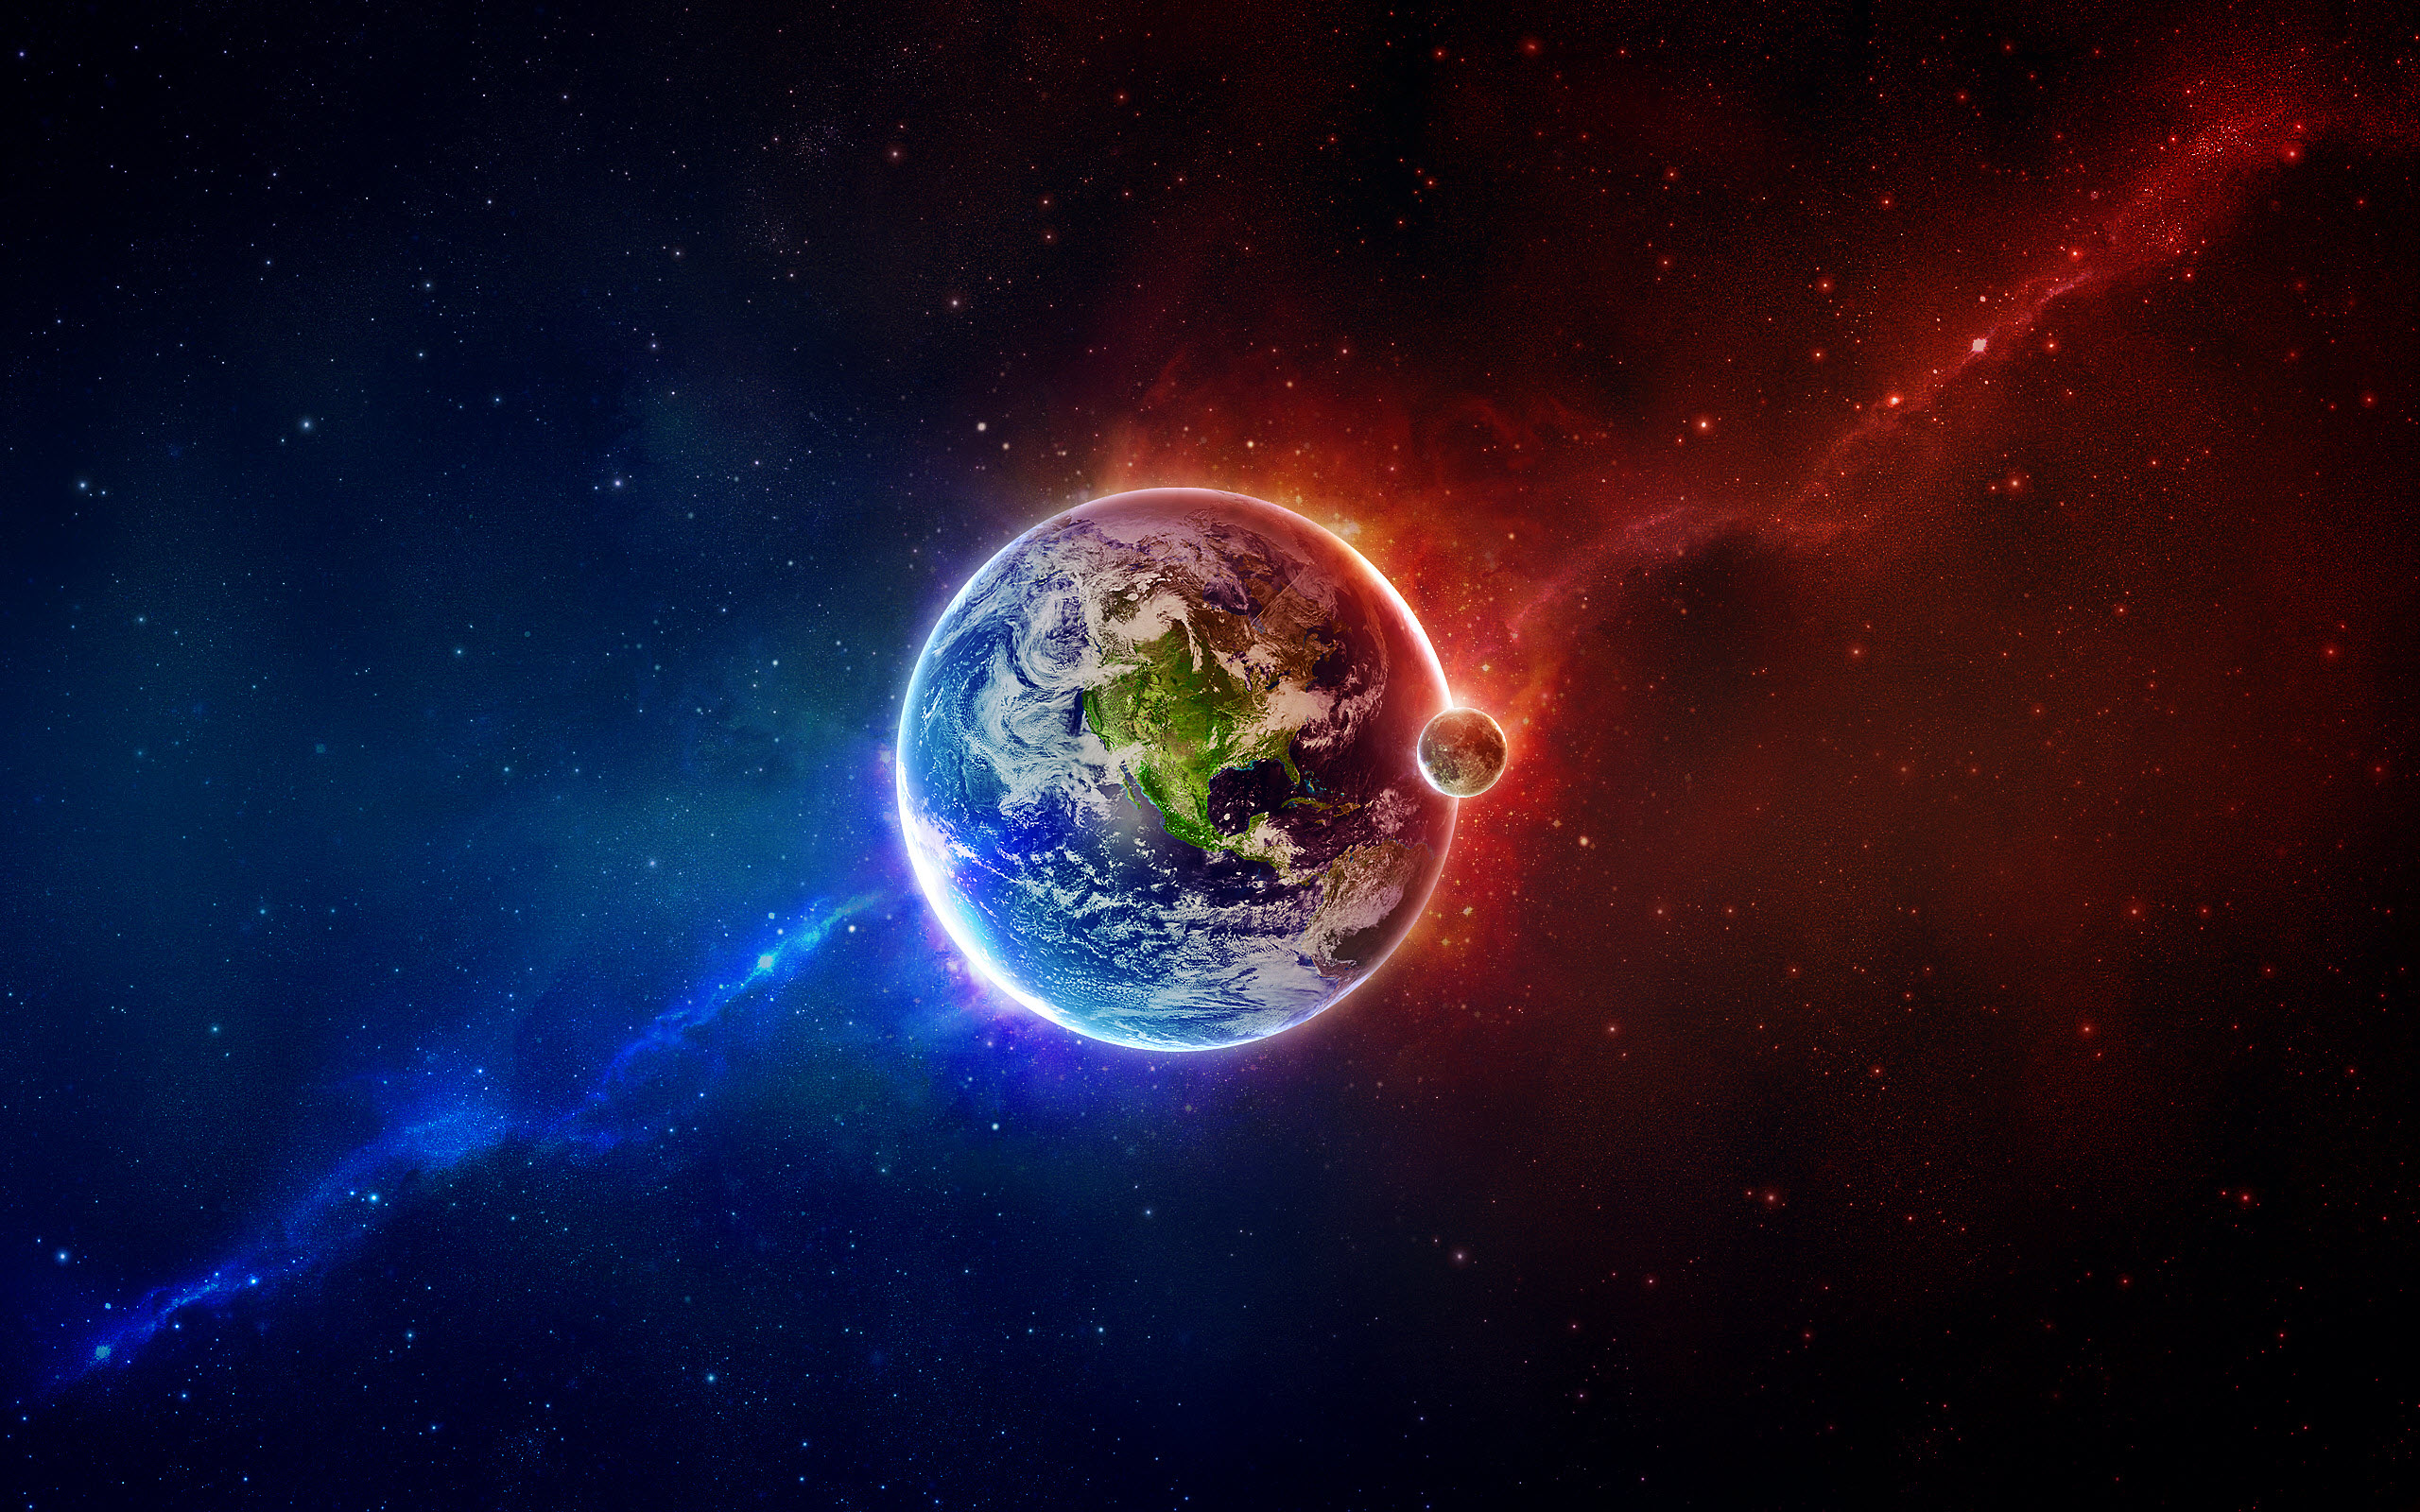 33 Free HD Universe Backgrounds For Desktops Laptops and Tablets